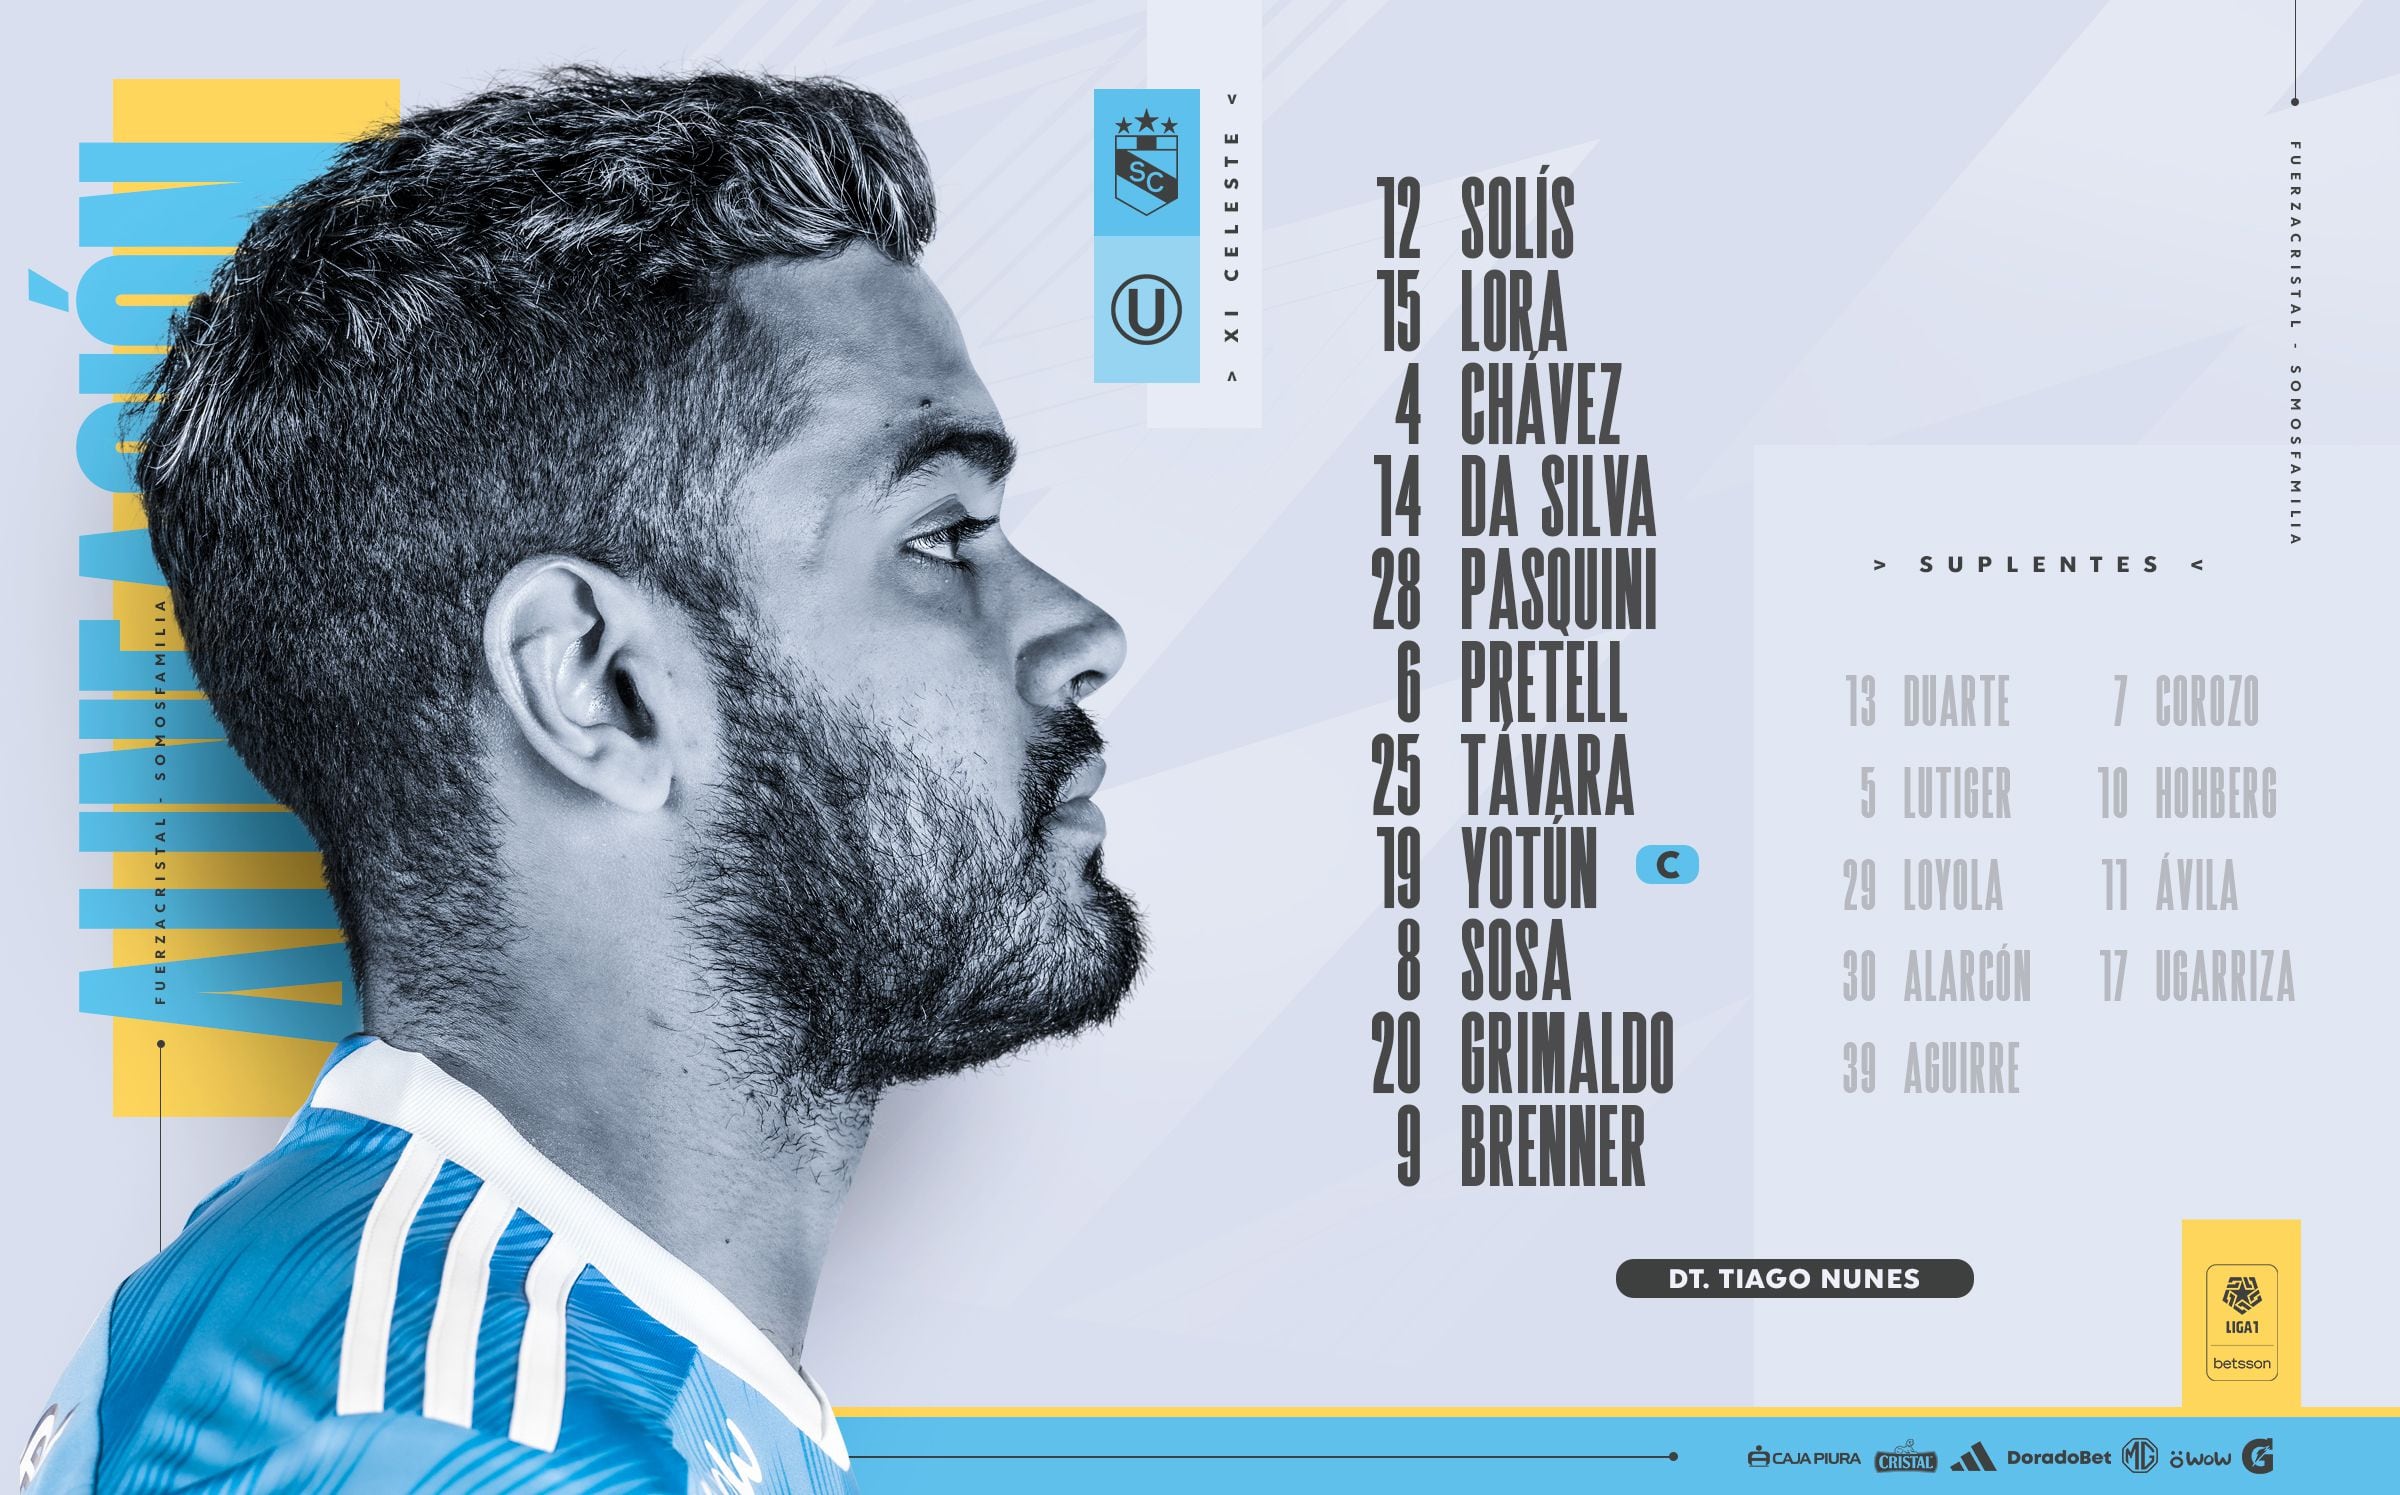 Sporting Cristal's starting team to face Universitario on date 13 of the 2023 Clausura Tournament - Credit: Sporting Cristal